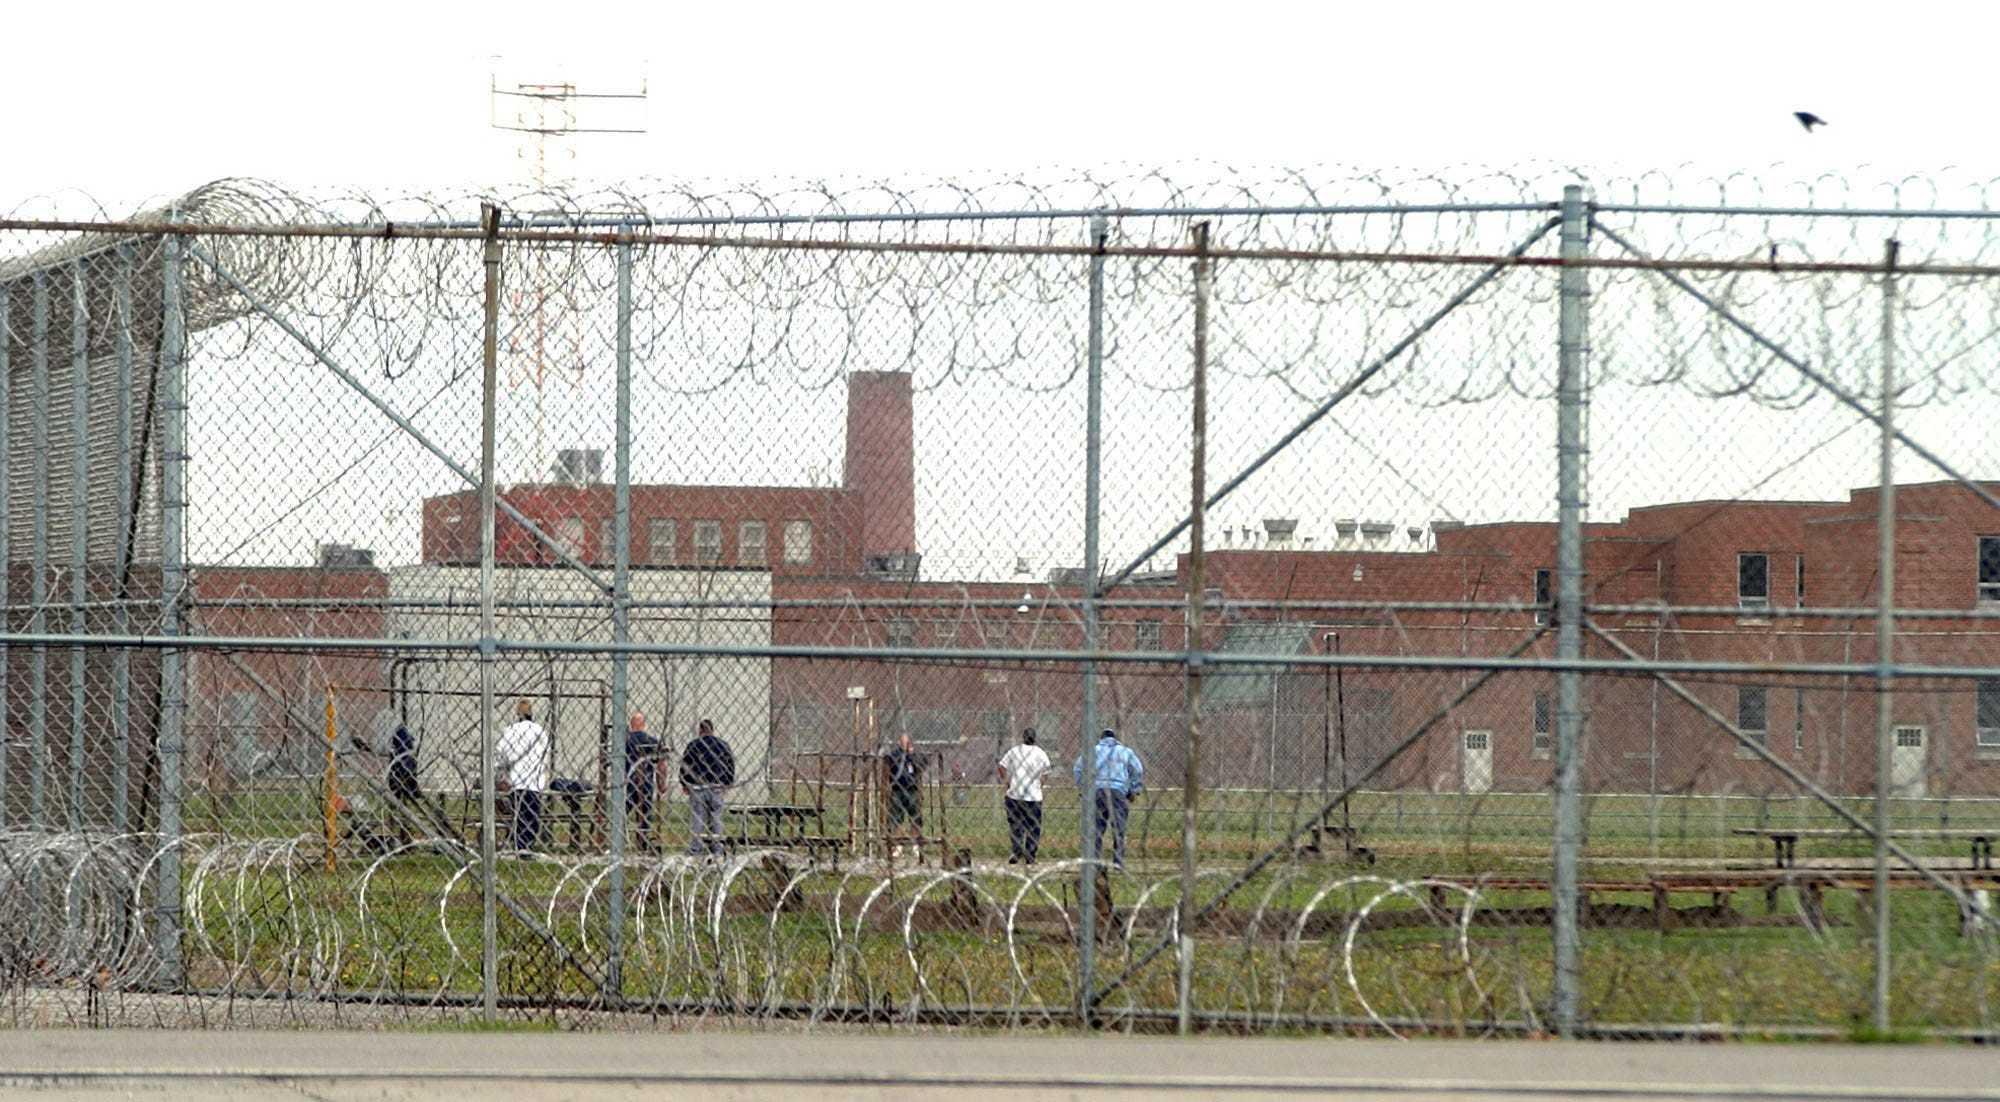 Coronavirus in Ohio: More than 1,800 inmates at Marion Correctional test positive